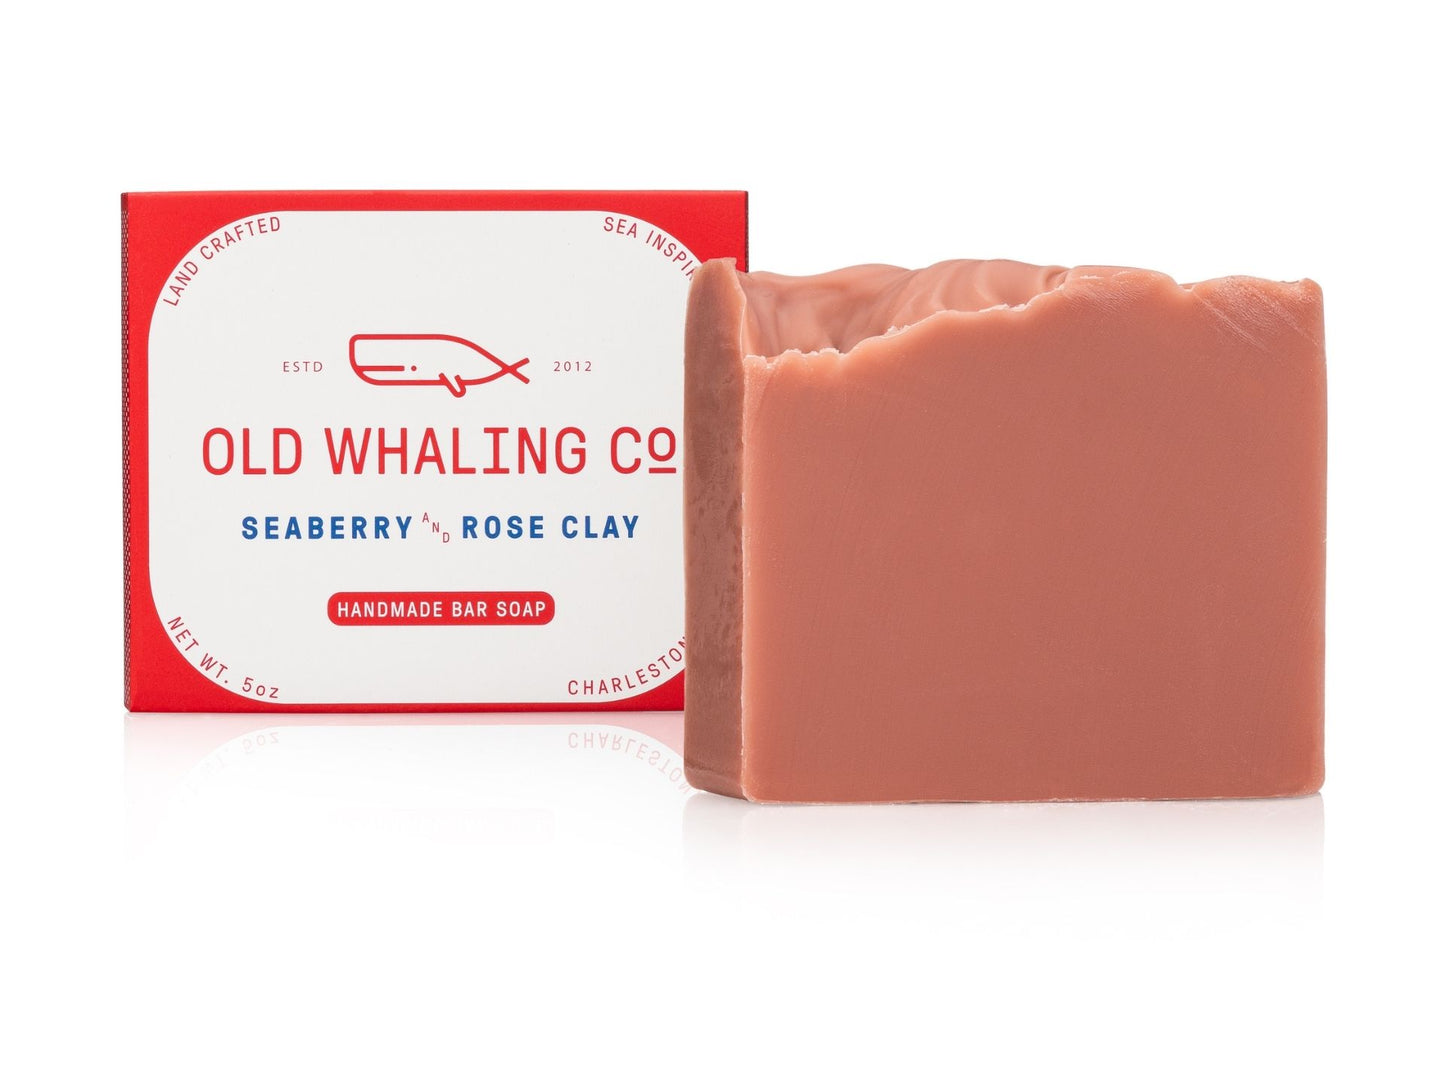 Old Whaling Co Seaberry & Rose Clay Bar Soap